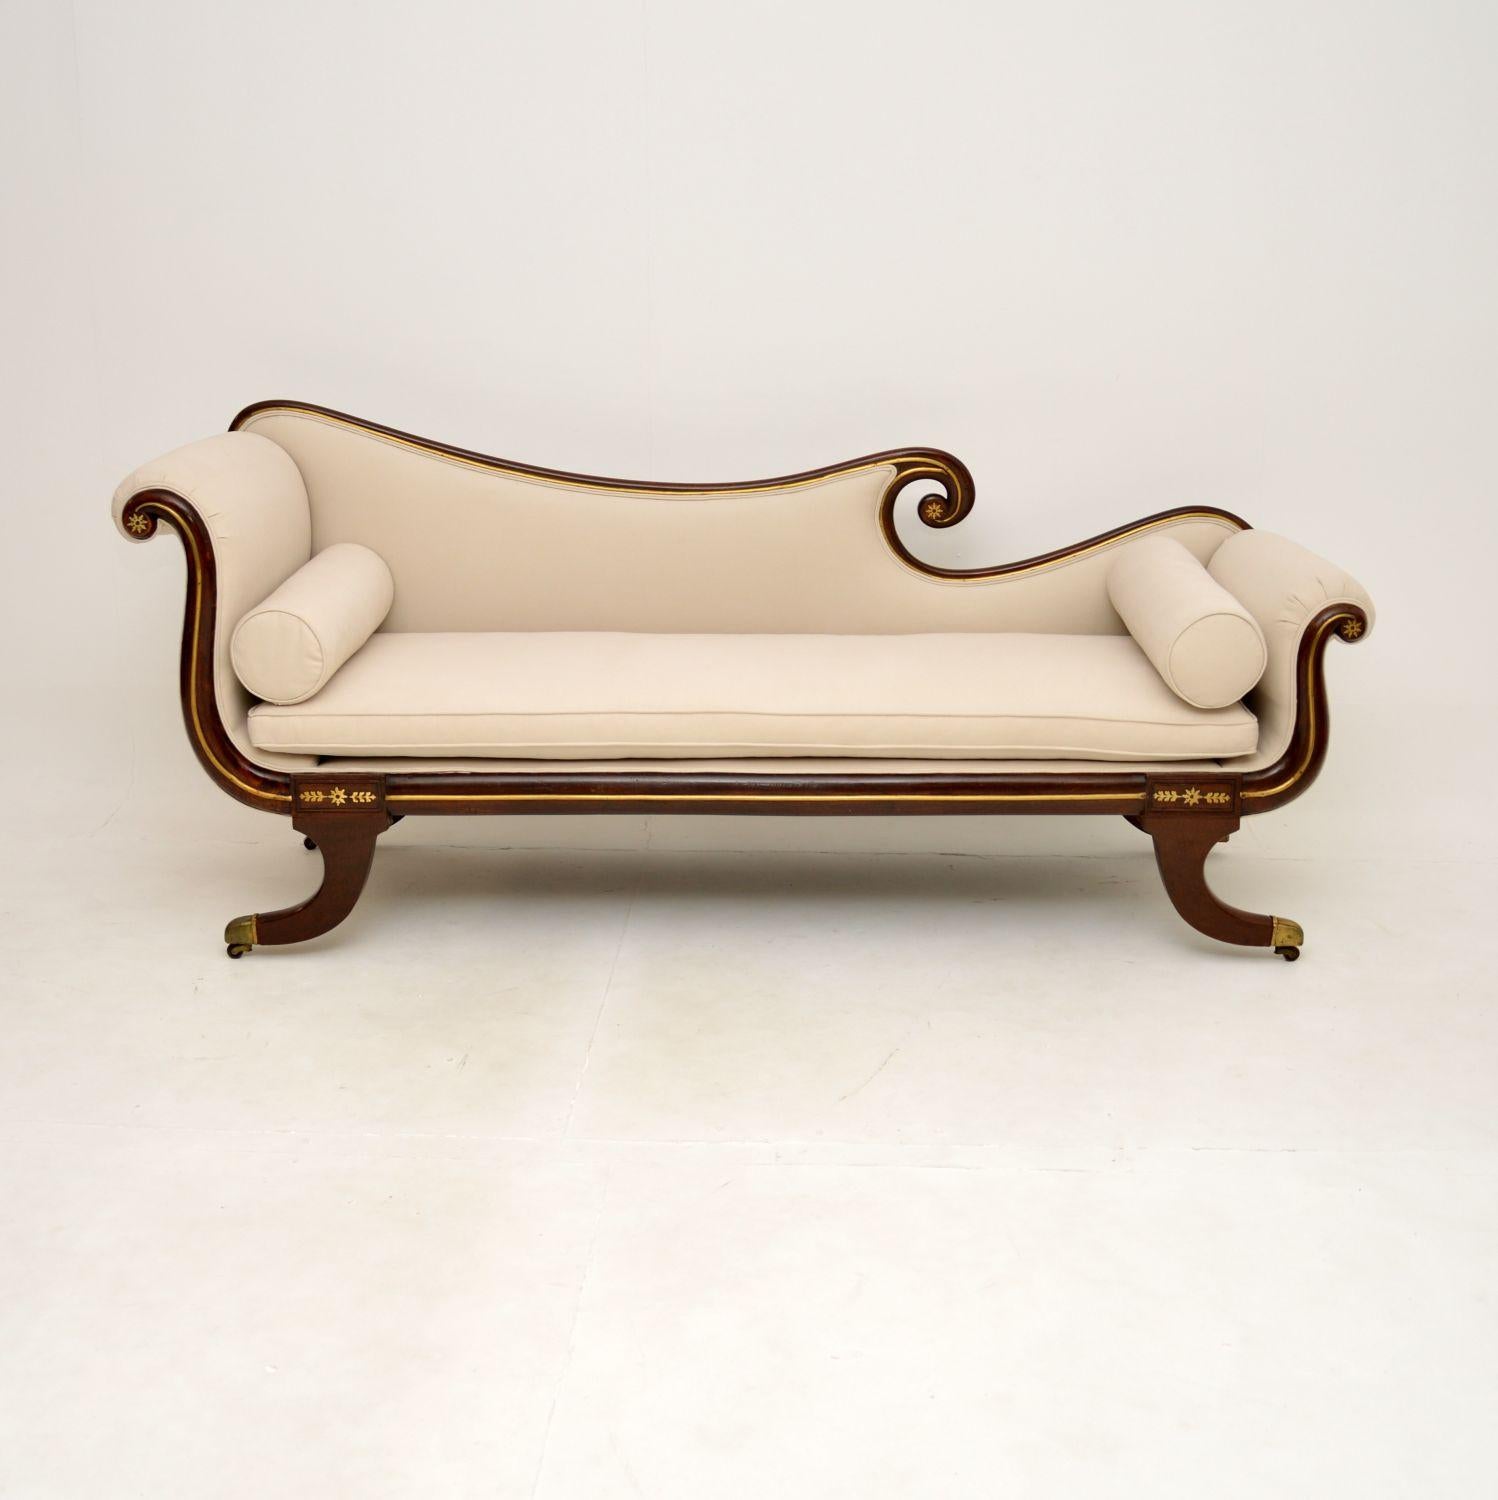 An extremely beautiful and impressive antique Regency period chaise longue. This was made in England, it dates from around the 1810-1820’s.

The quality is outstanding, this has a gorgeous sweeping design and it is very well made. The frame has